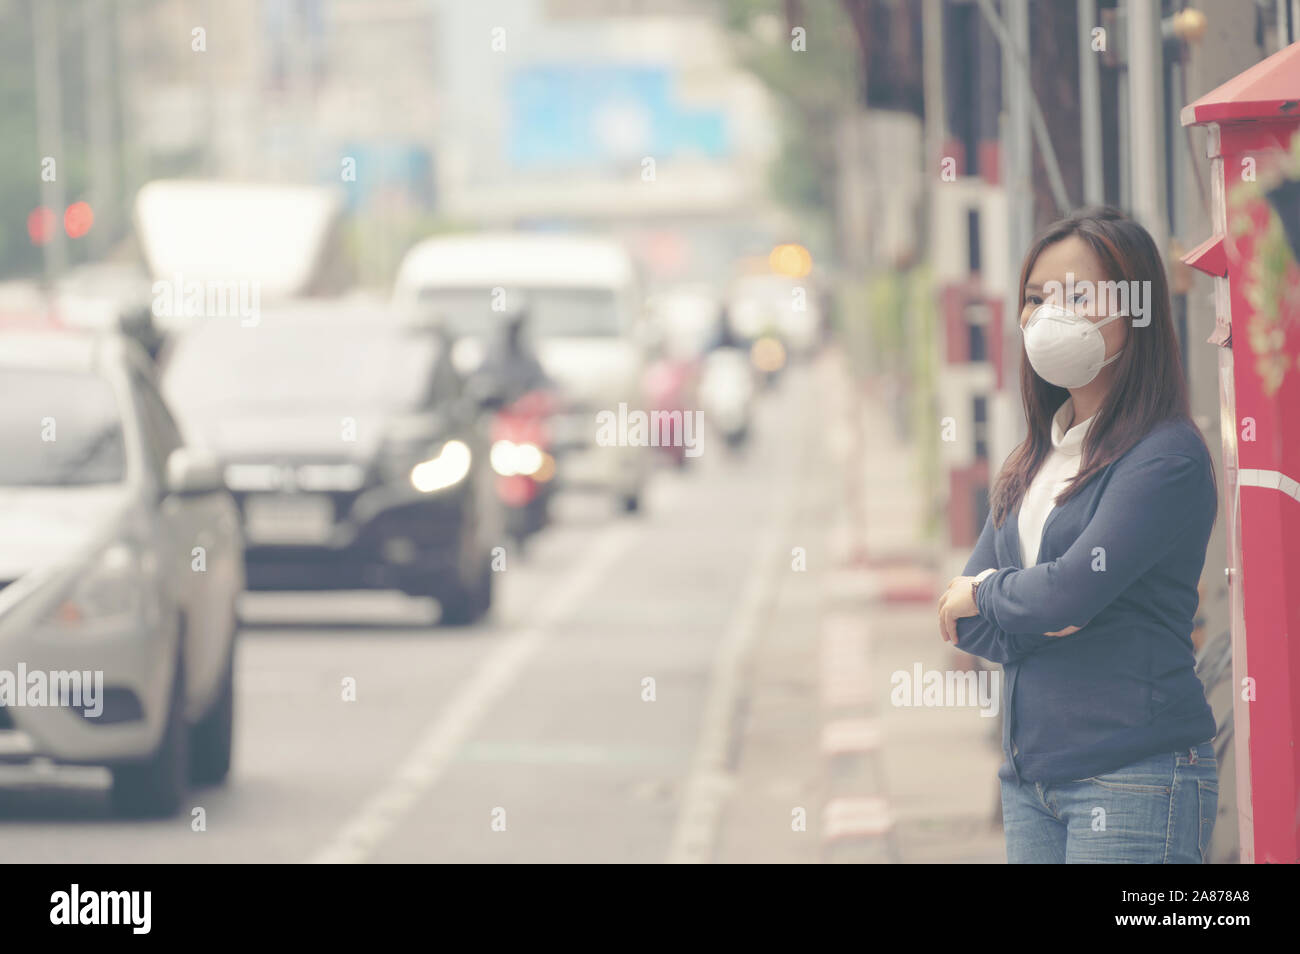 woman wearing protective mask in the city street, Bangkok thailand Stock Photo